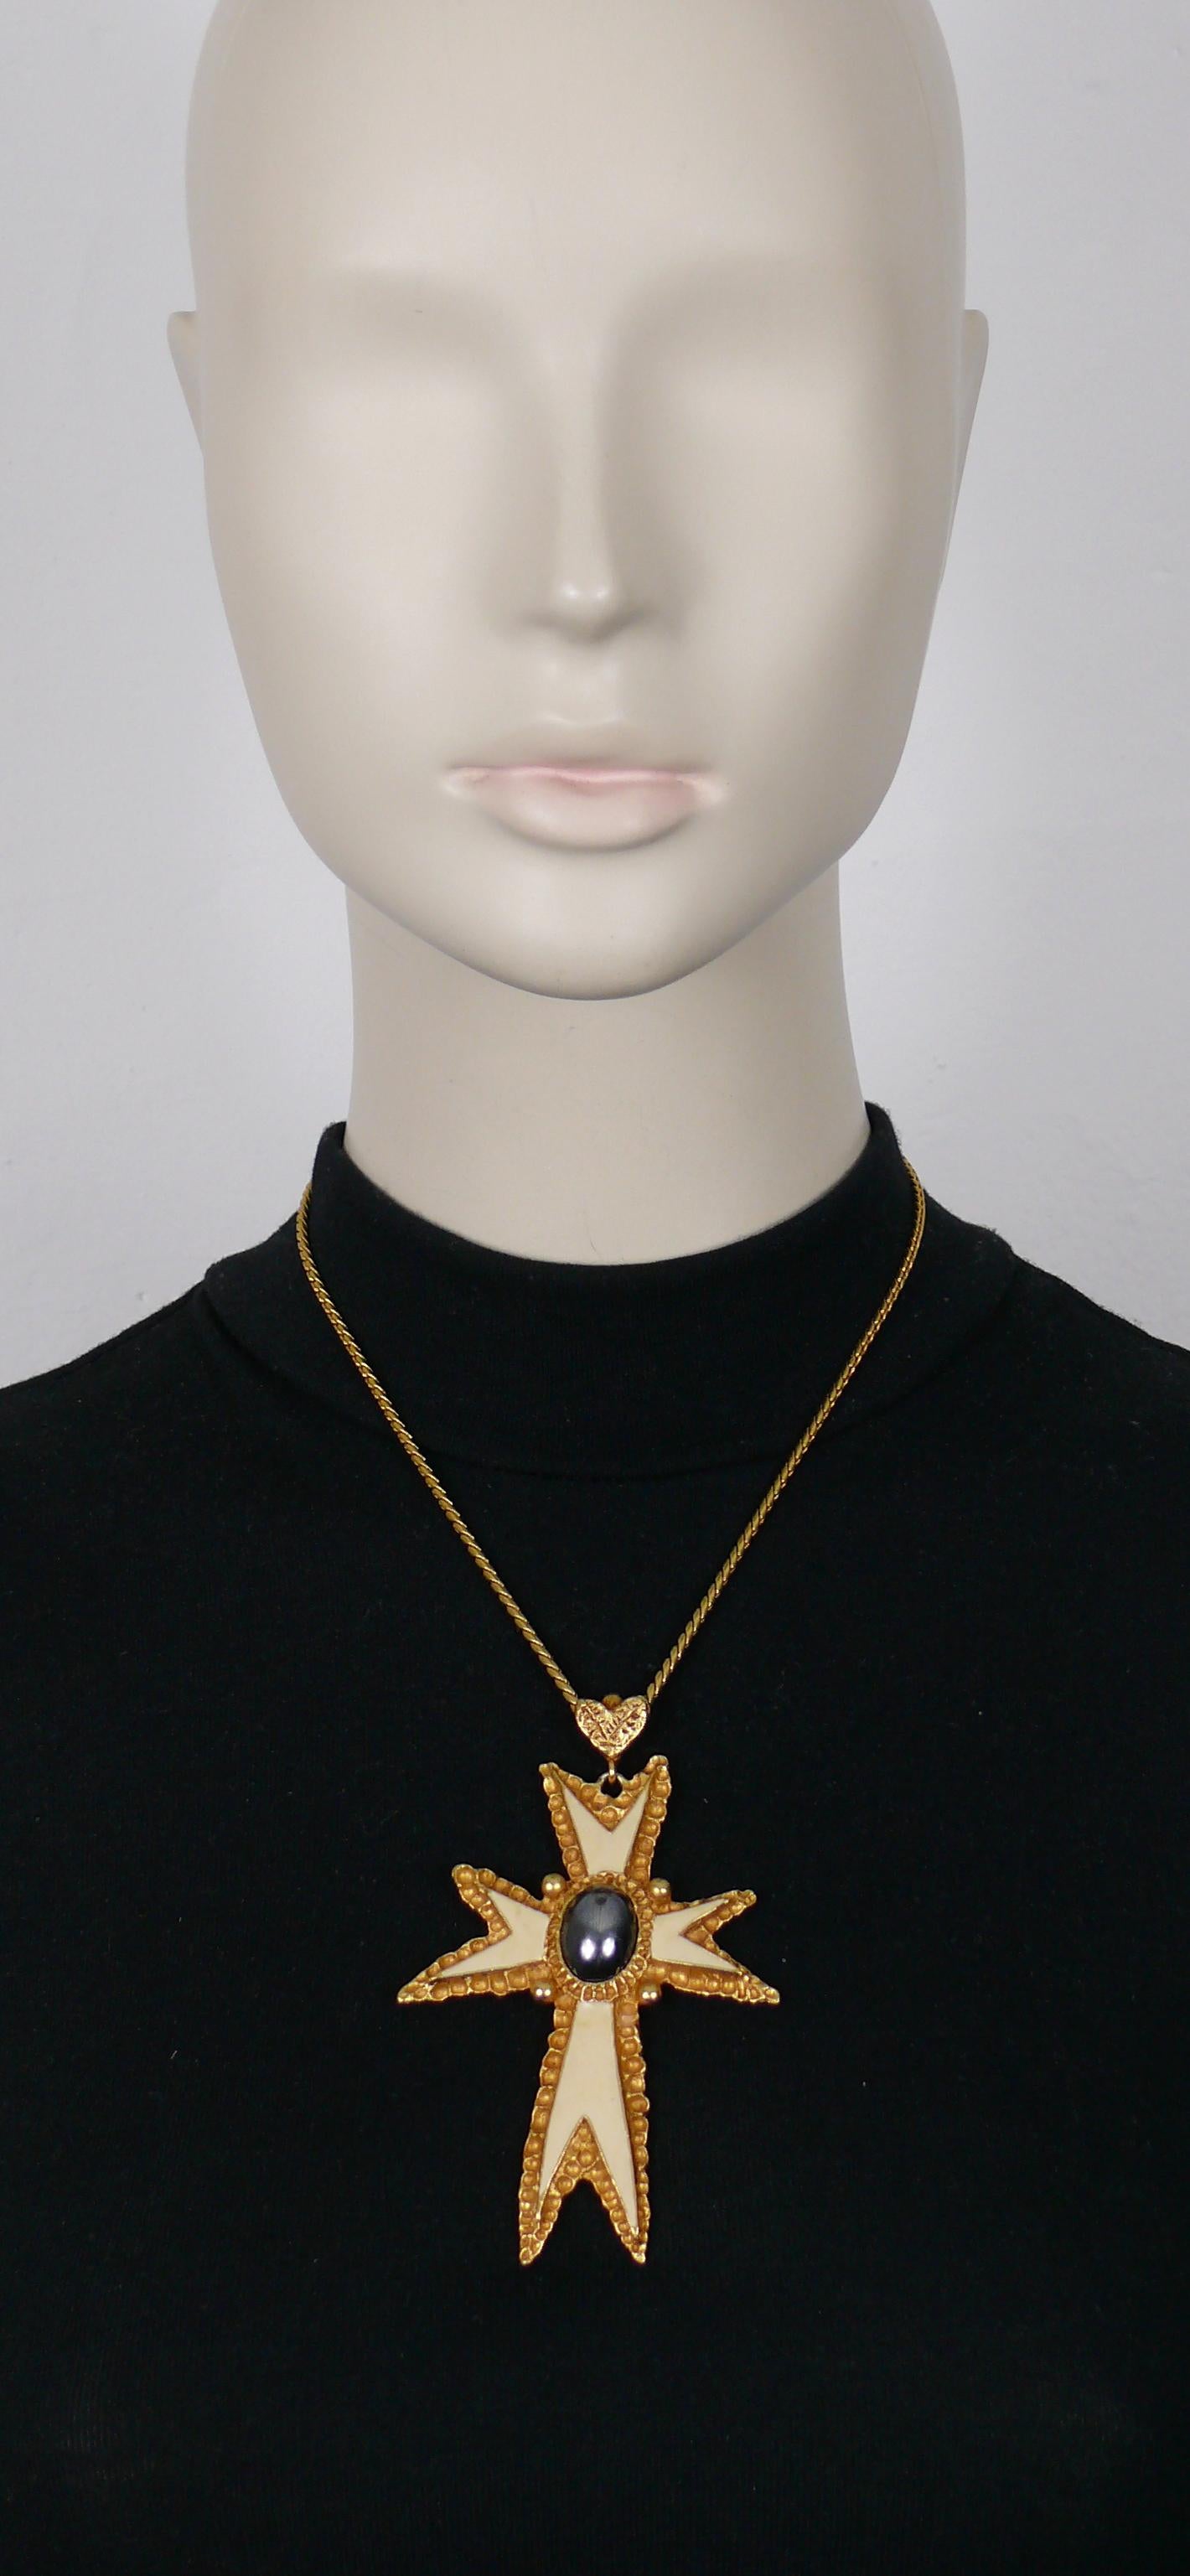 CHRISTIAN LACROIX vintage 1994 chain necklace featuring a gold tone enameled cross pendant with hematite color oval glass cabochon embellishement.

Marked CHRISTIAN LACROIX E94 Made in France.
CL monogram tag on the extension chain.

Indicative